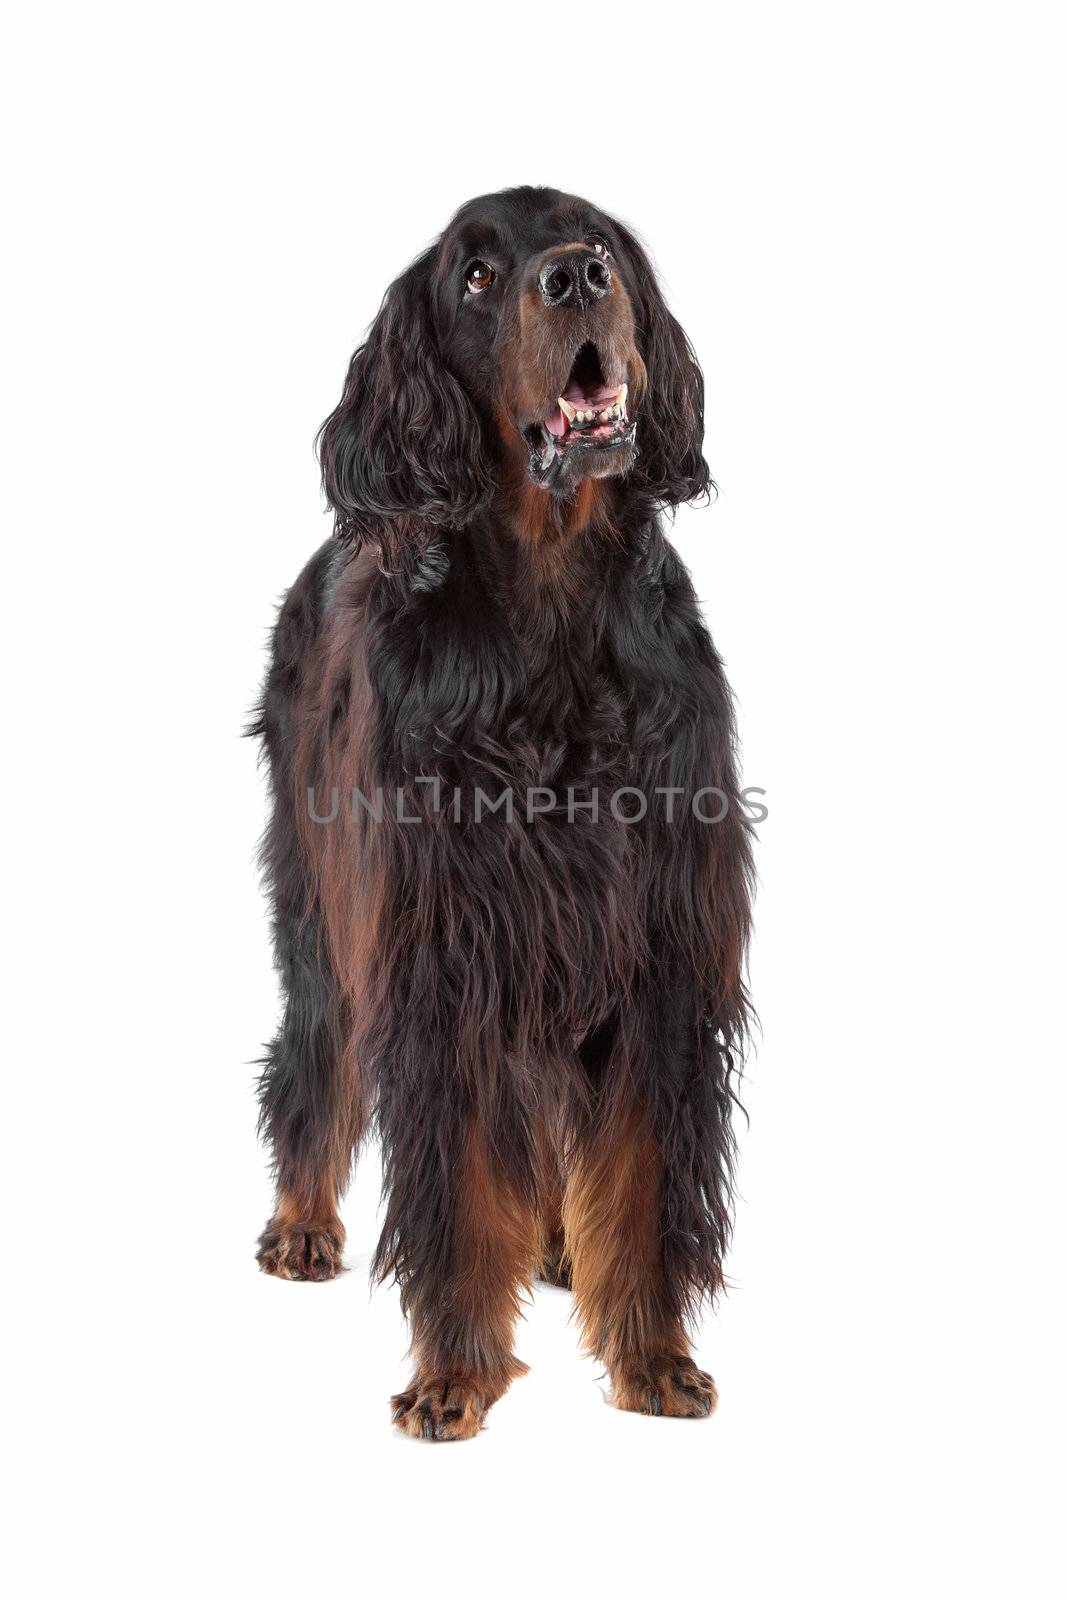 Front view of Irish Setter dog looking up, on a white background